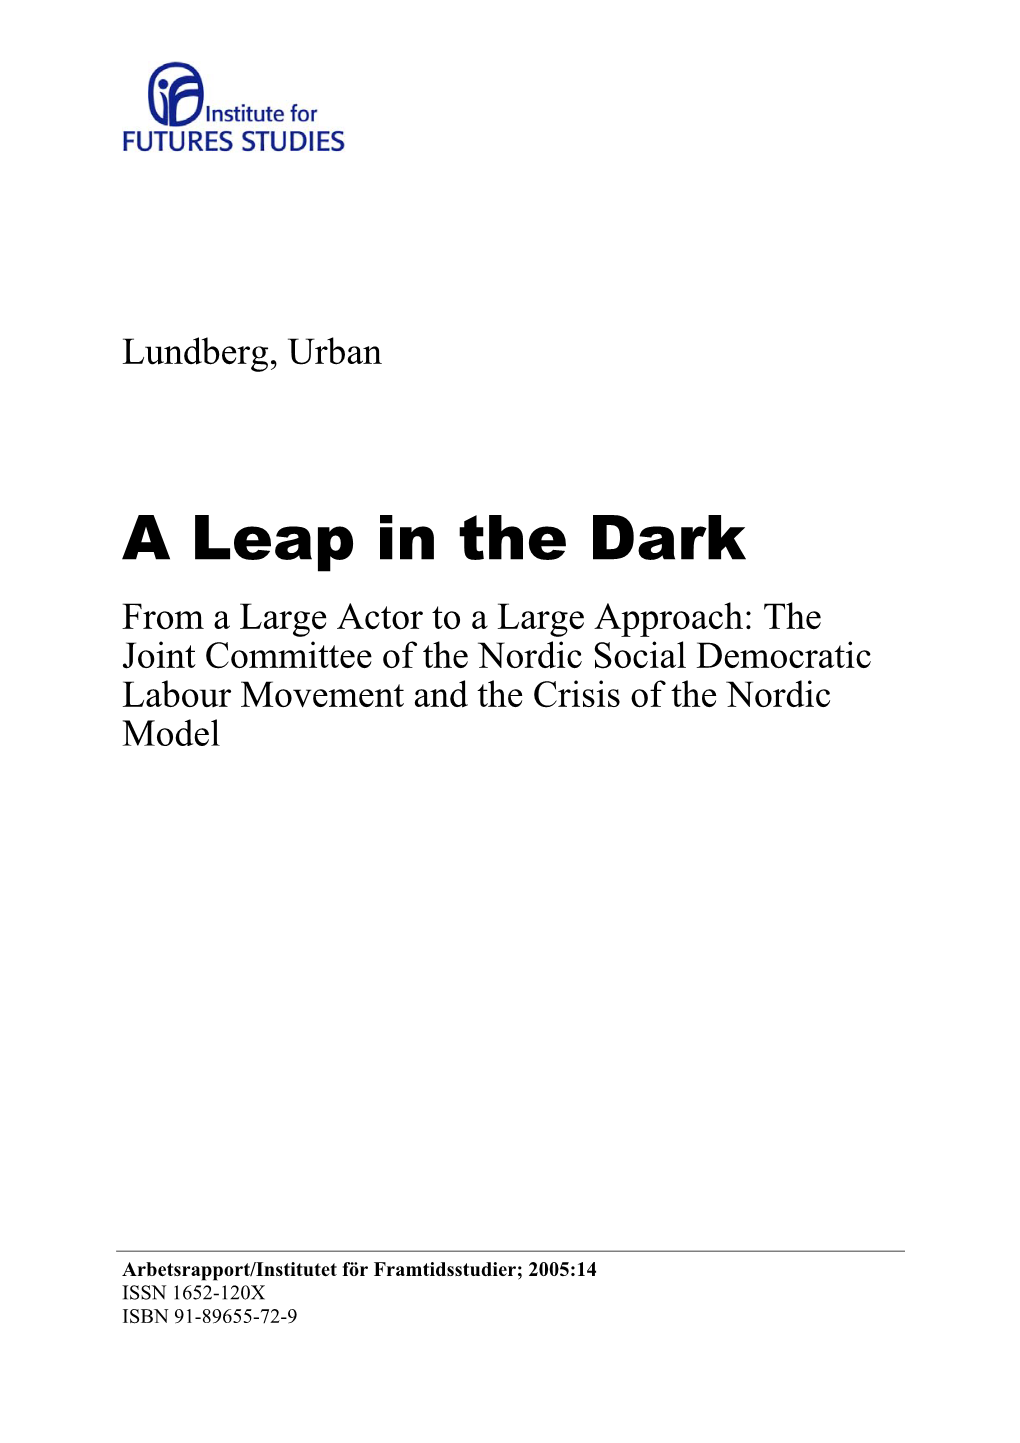 A Leap in the Dark from a Large Actor to a Large Approach: the Joint Committee of the Nordic Social Democratic Labour Movement and the Crisis of the Nordic Model